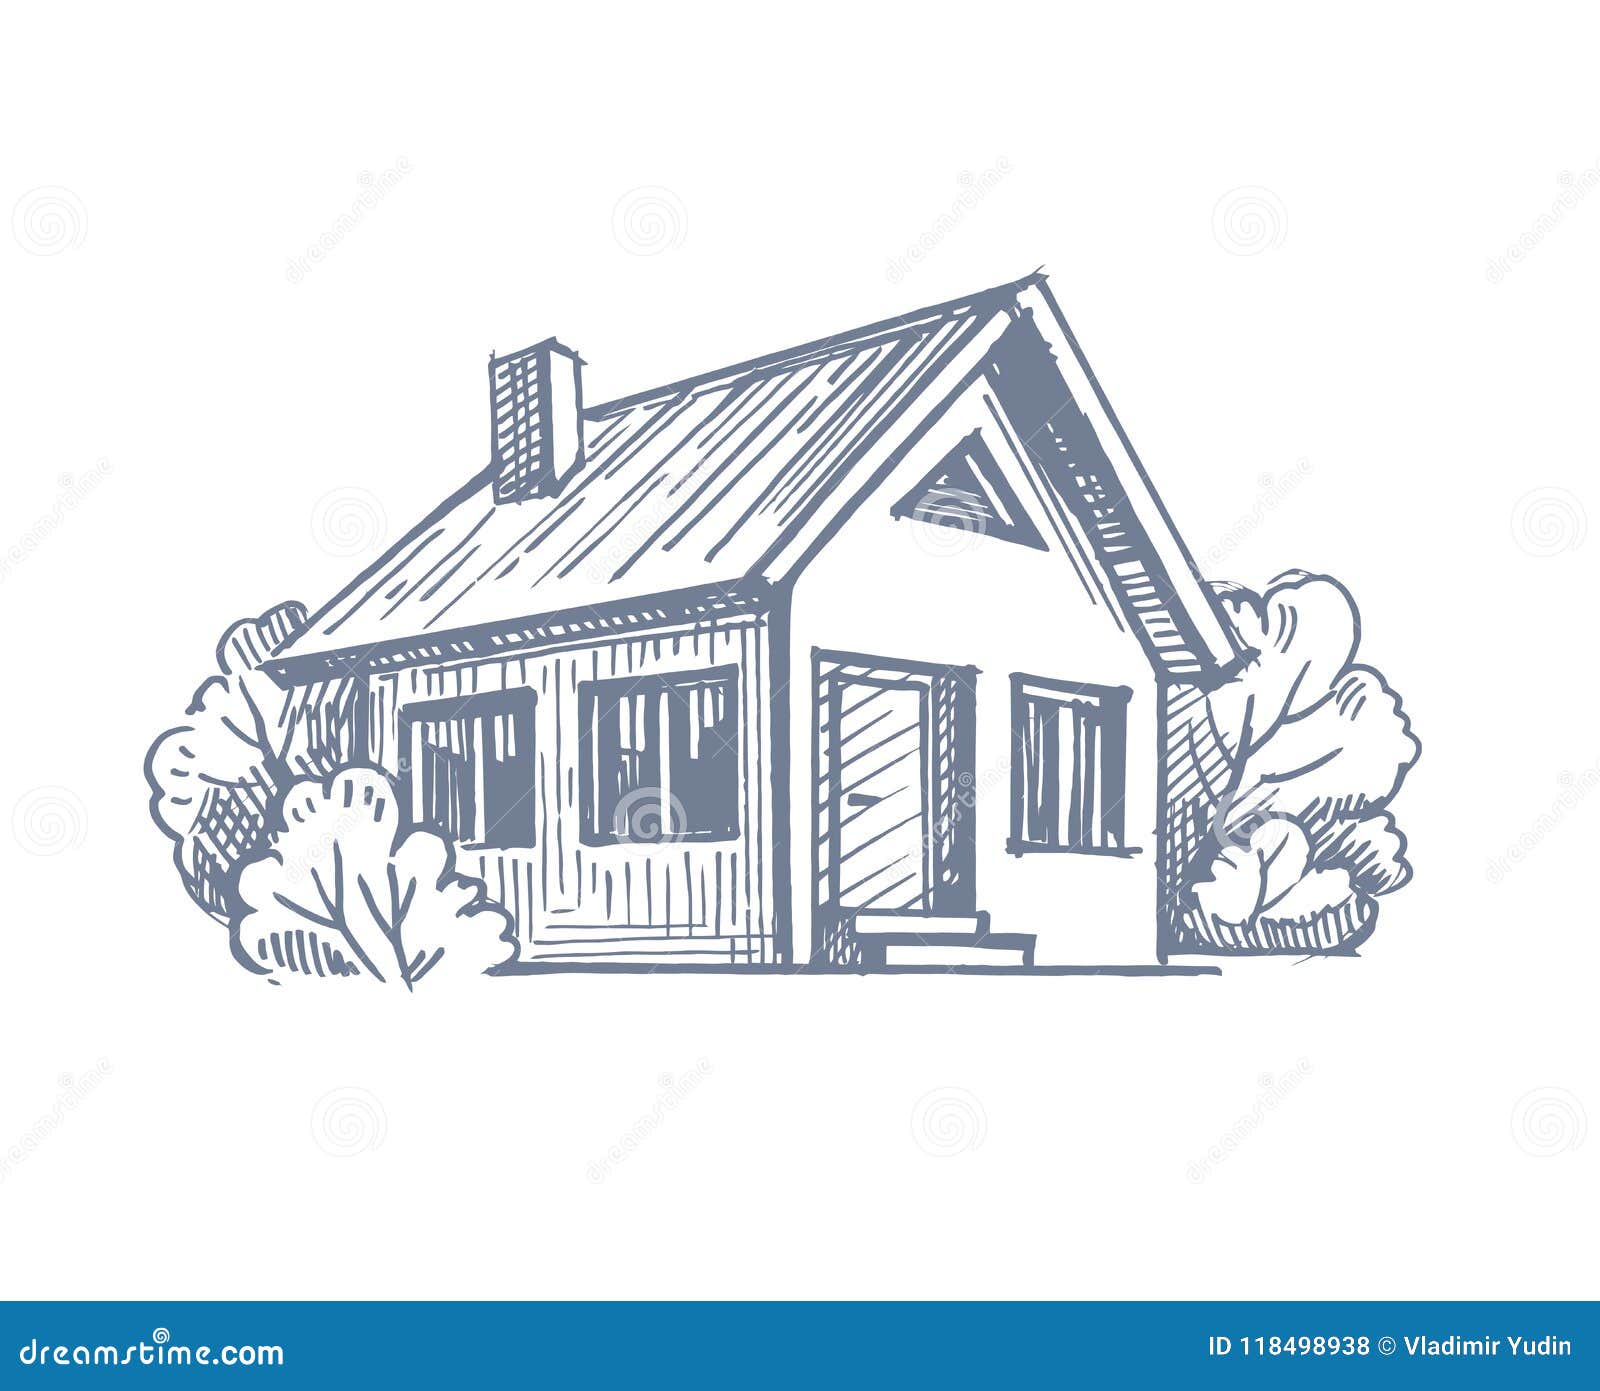 Creative Sketch Drawing House Vector 